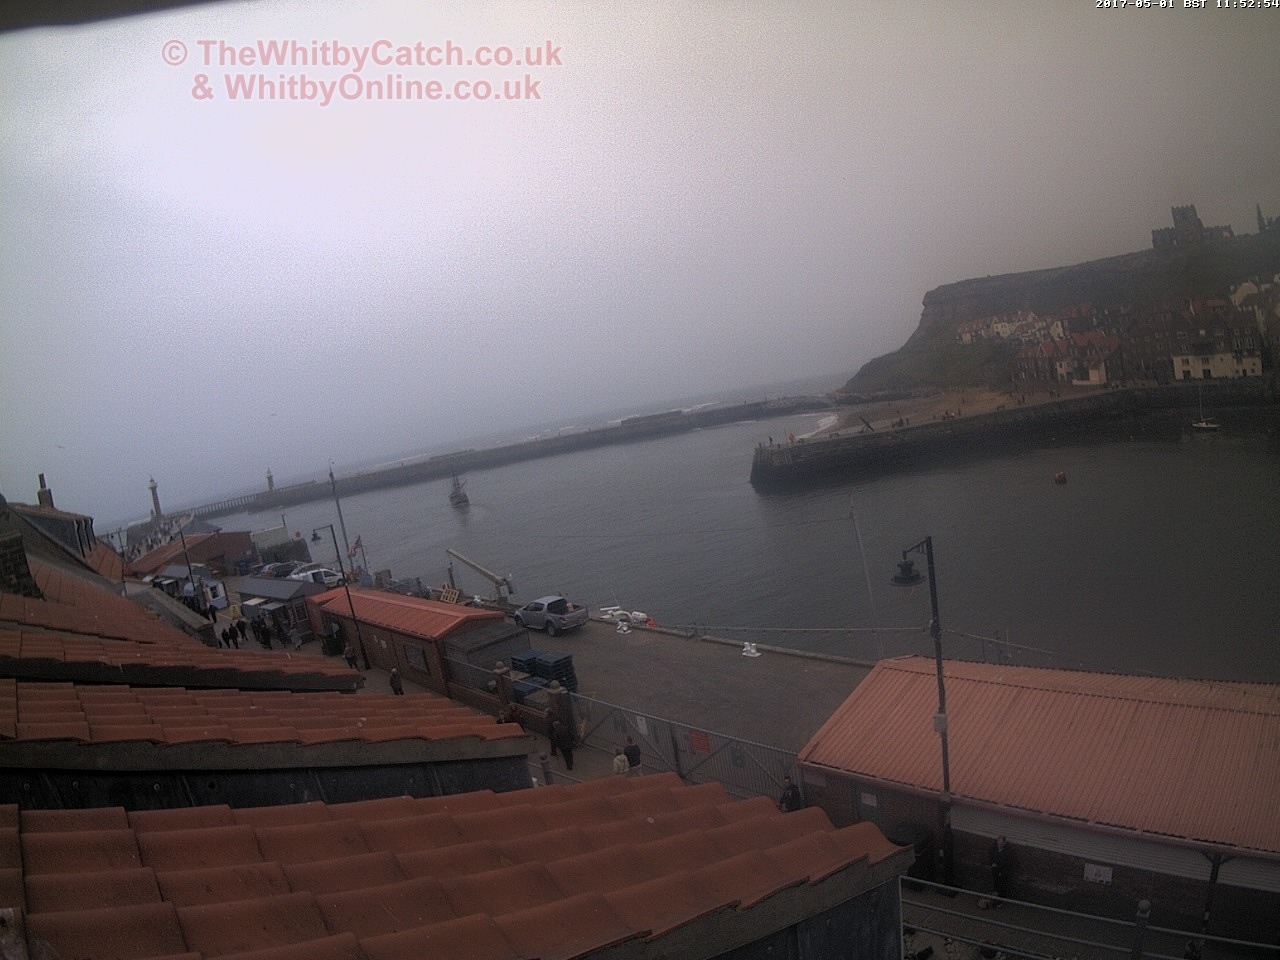 Whitby Mon 1st May 2017 11:53.